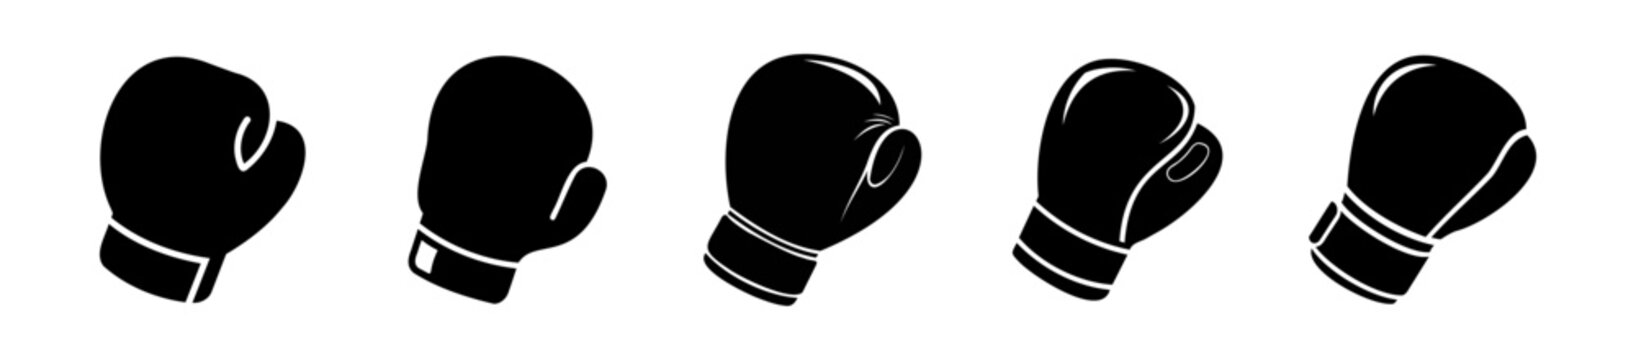 Set of Black boxing gloves in silhouette. Black and white graphic art of sporting gloves. Icon, logo, sign, pictogram, print. Concept of sports equipment, powerful punch. Isolated on white backdrop